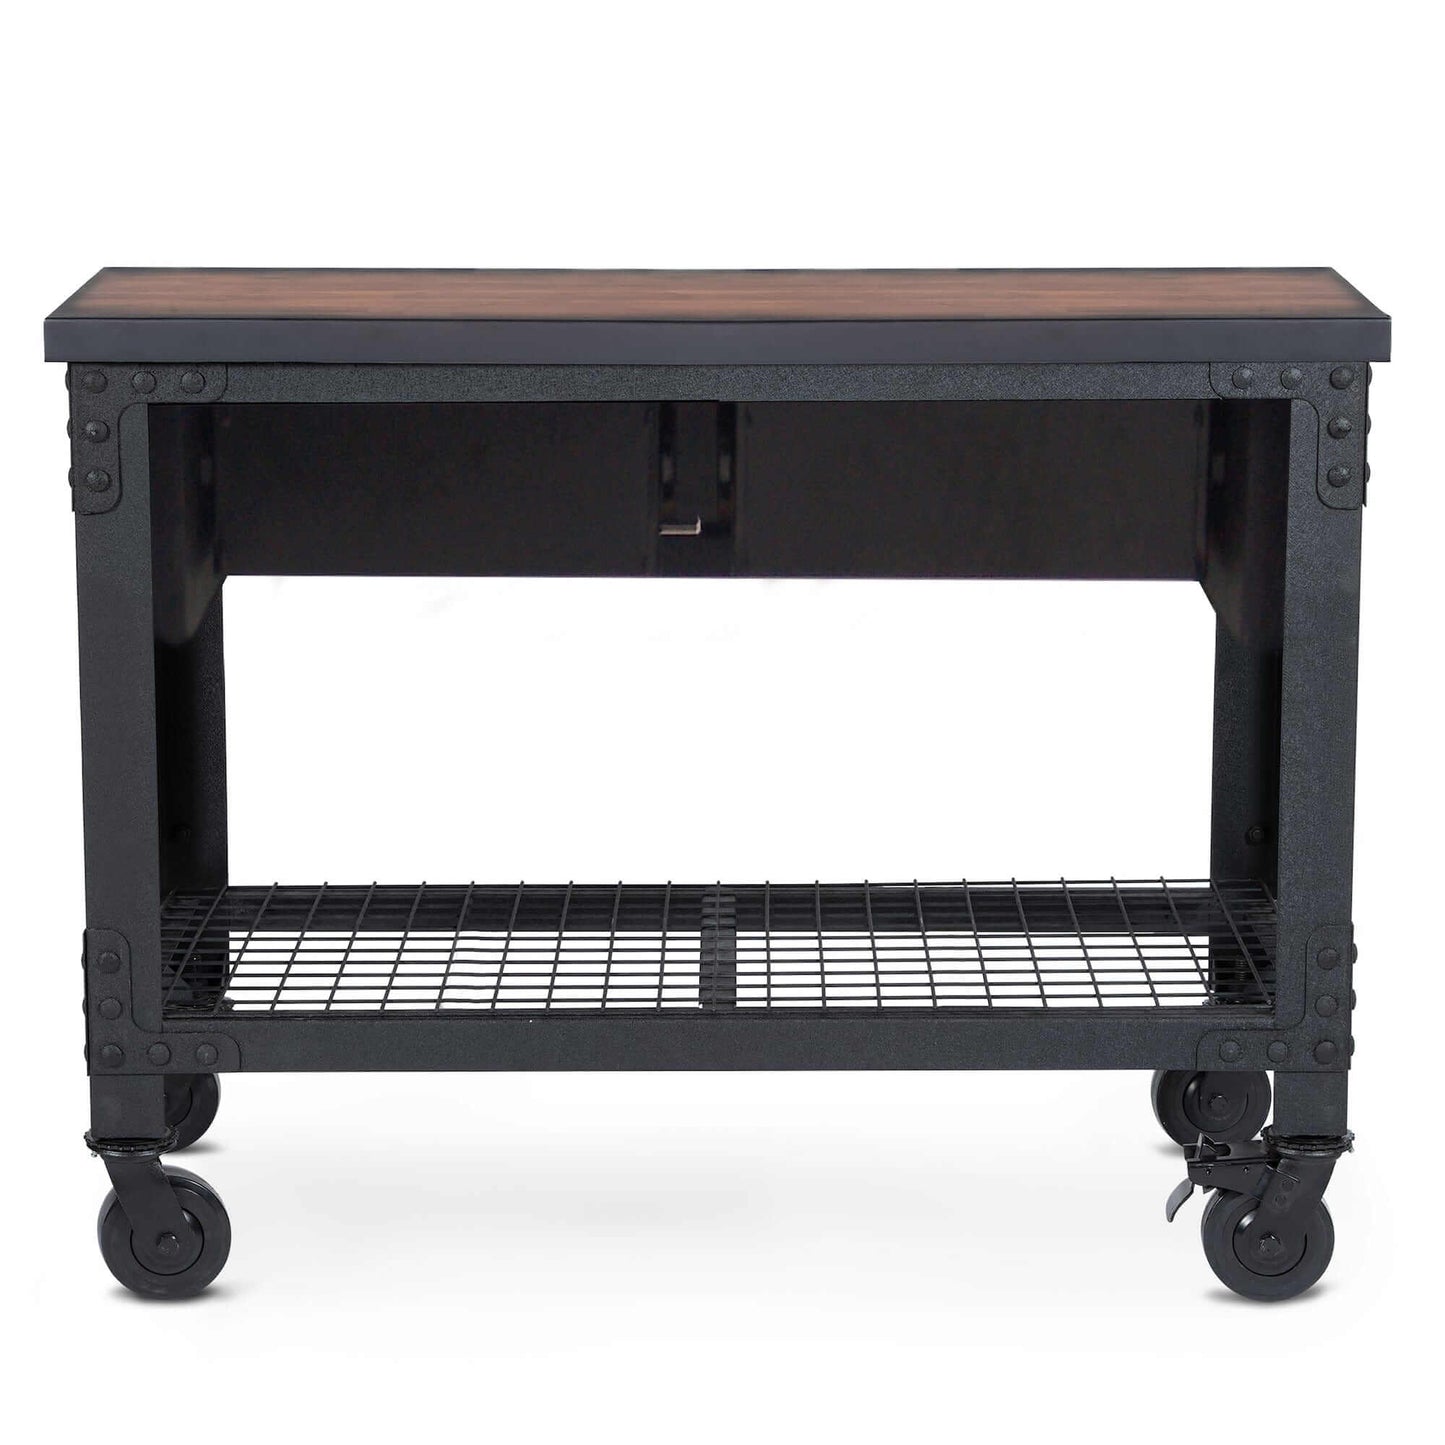 DuraMax 48 In x 24 In 2-Drawer Rolling Industrial Workbench with Wood Top